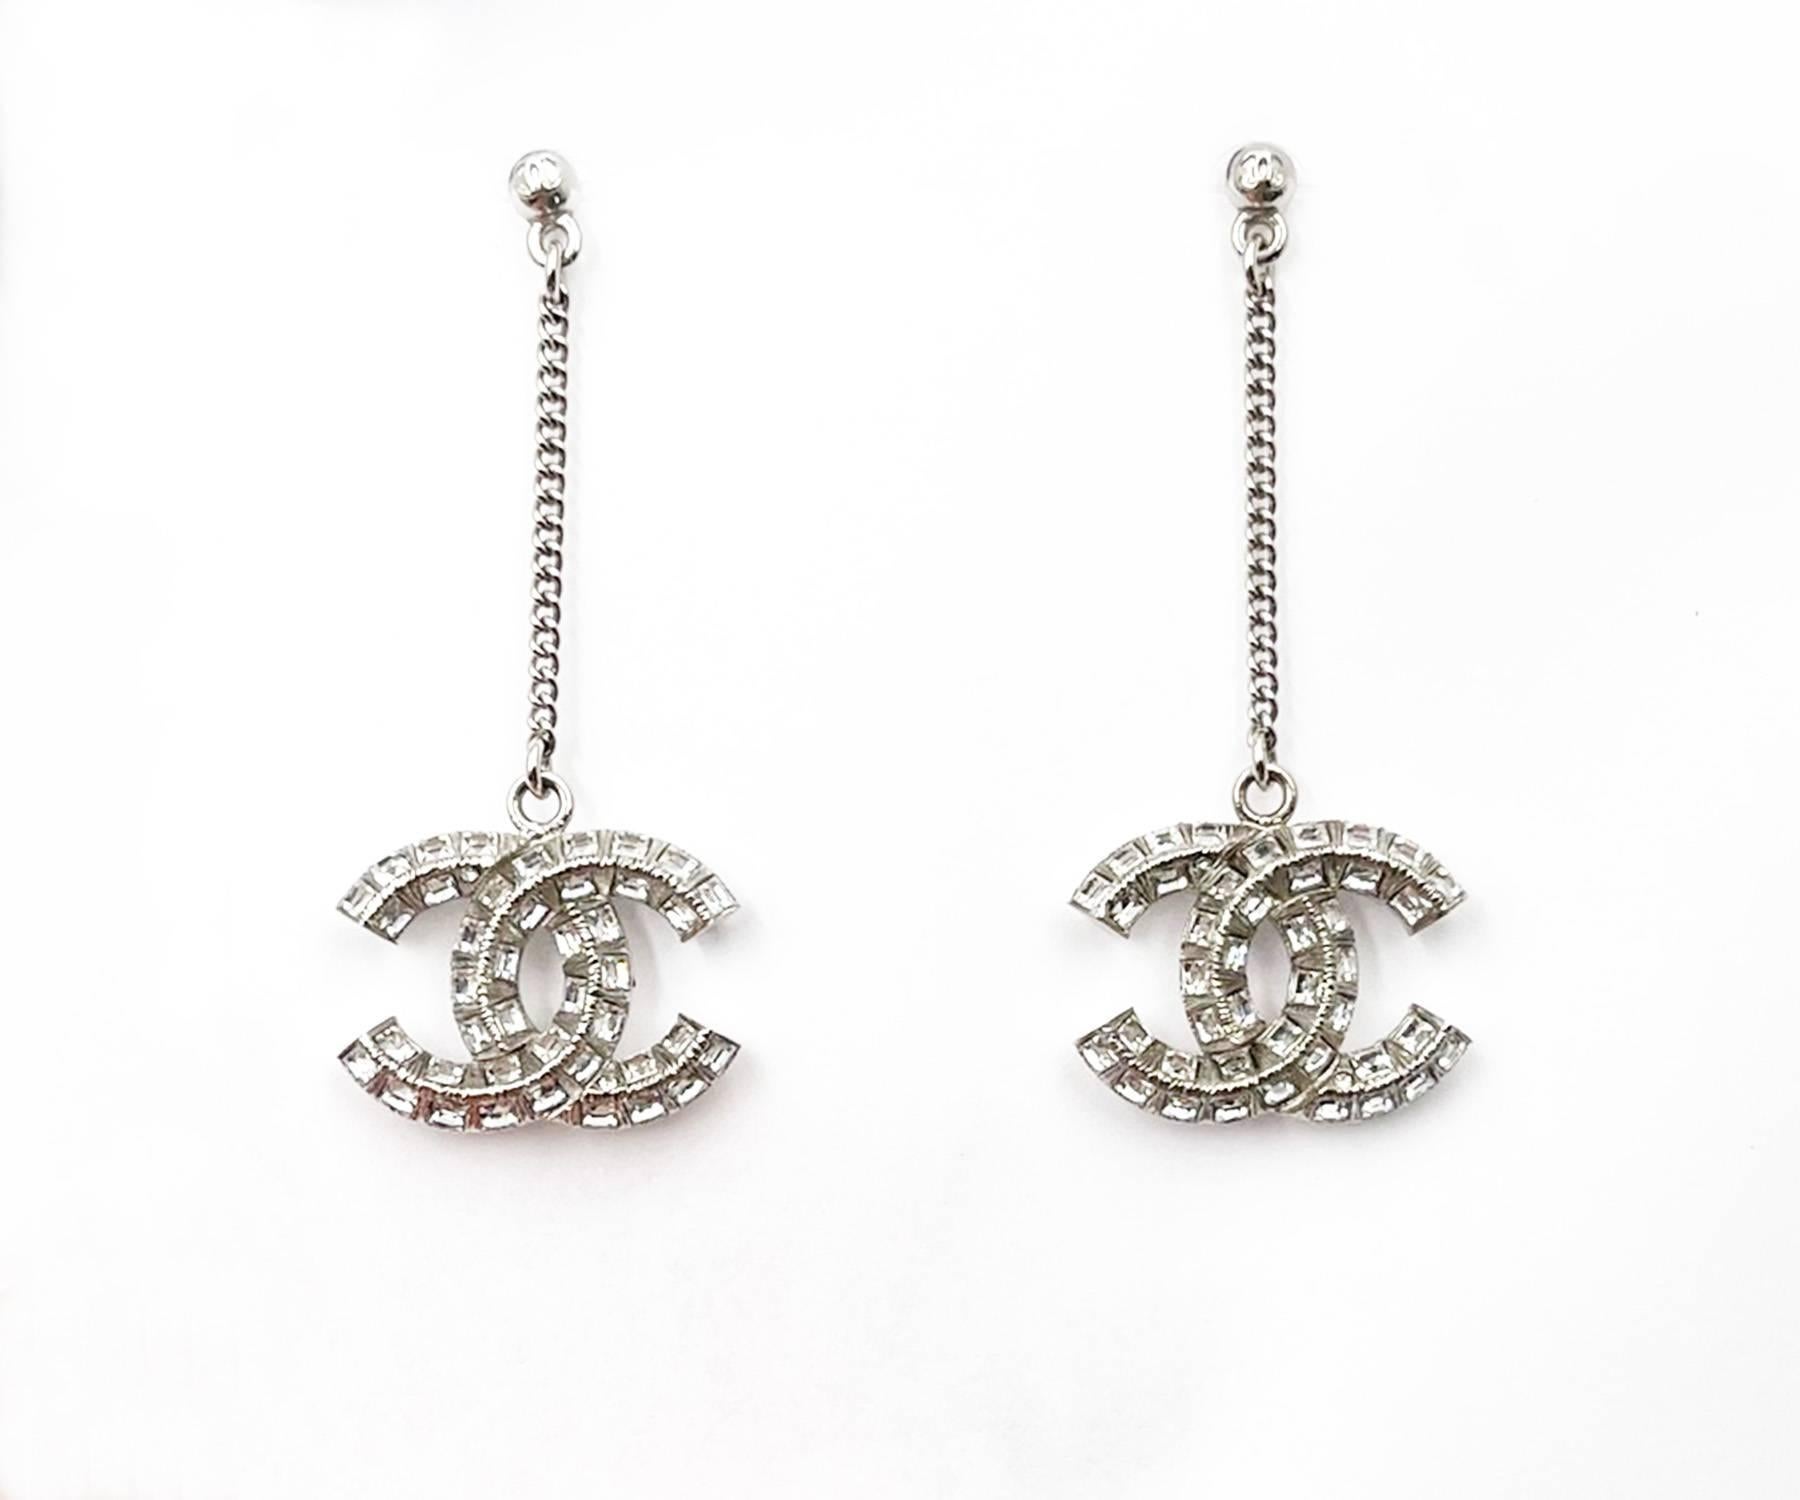 Chanel Silver CC Princess Square Crystal Dangle Long Piercing Earrings

* Marked 20
* Made in Italy
*Comes with original box and pouch

-It is approximately 2.2